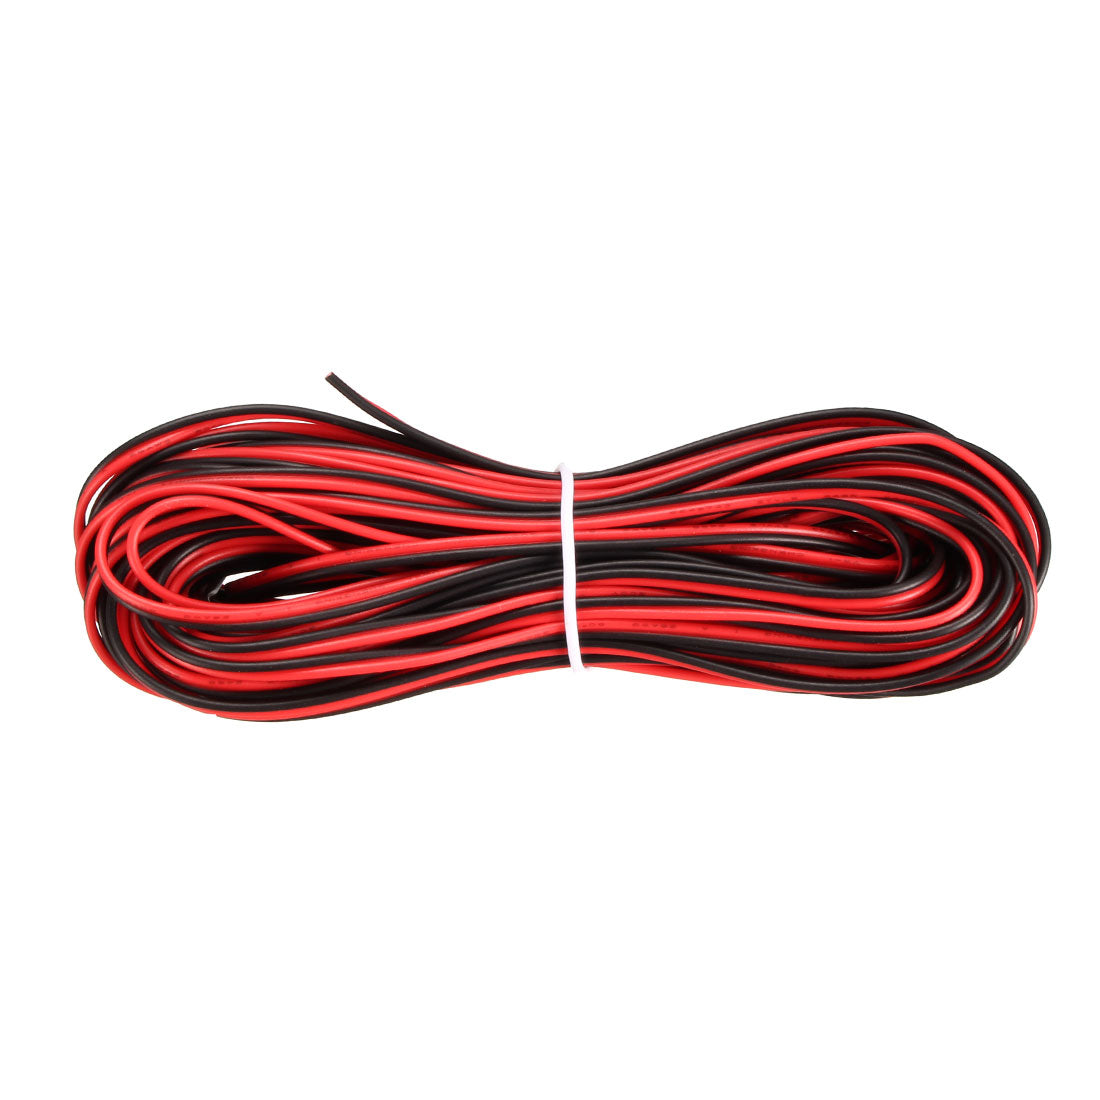 uxcell Uxcell Red Black Wire 2pin Extension Cable Cord 28 AWG Parallel Wire Tin Plated Copper 10M Length for LED Strip Light